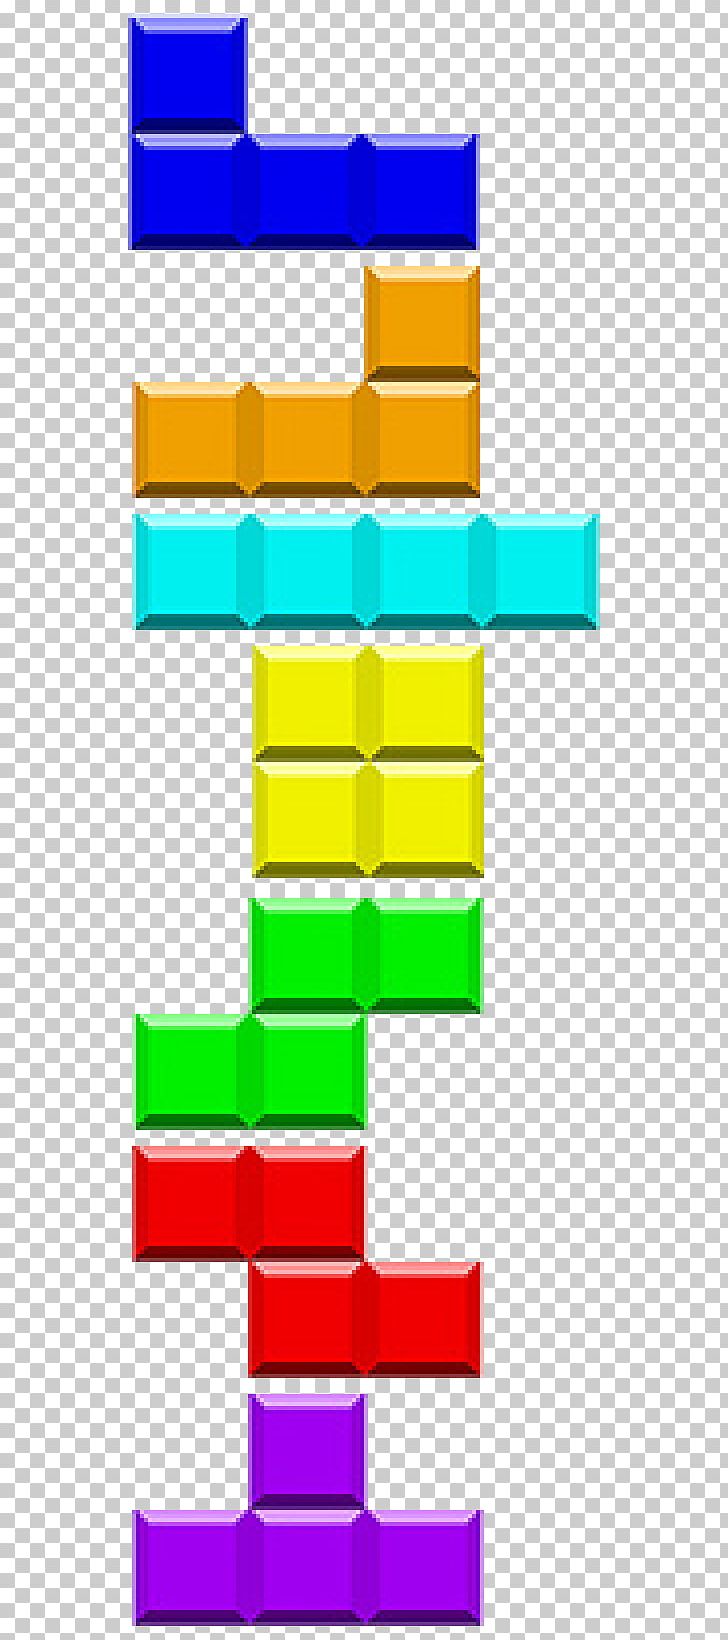 tetris friends how to play with friends